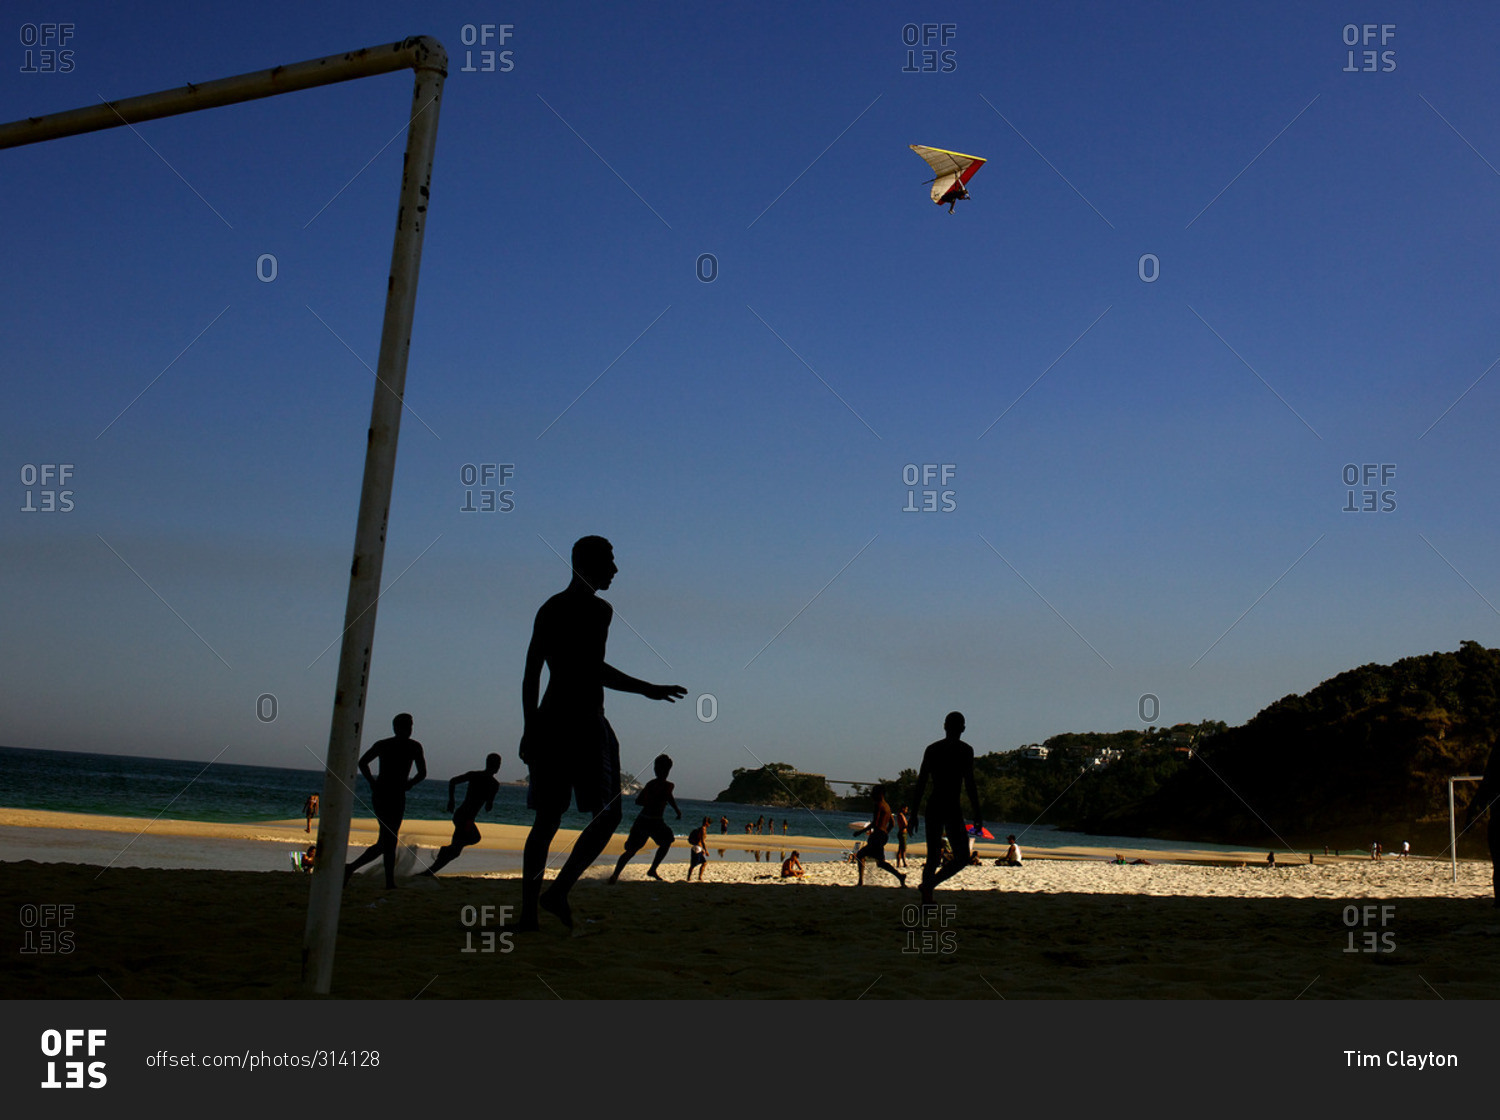 A hang glider in the late afternoon light above football players at Sao Conrado beach